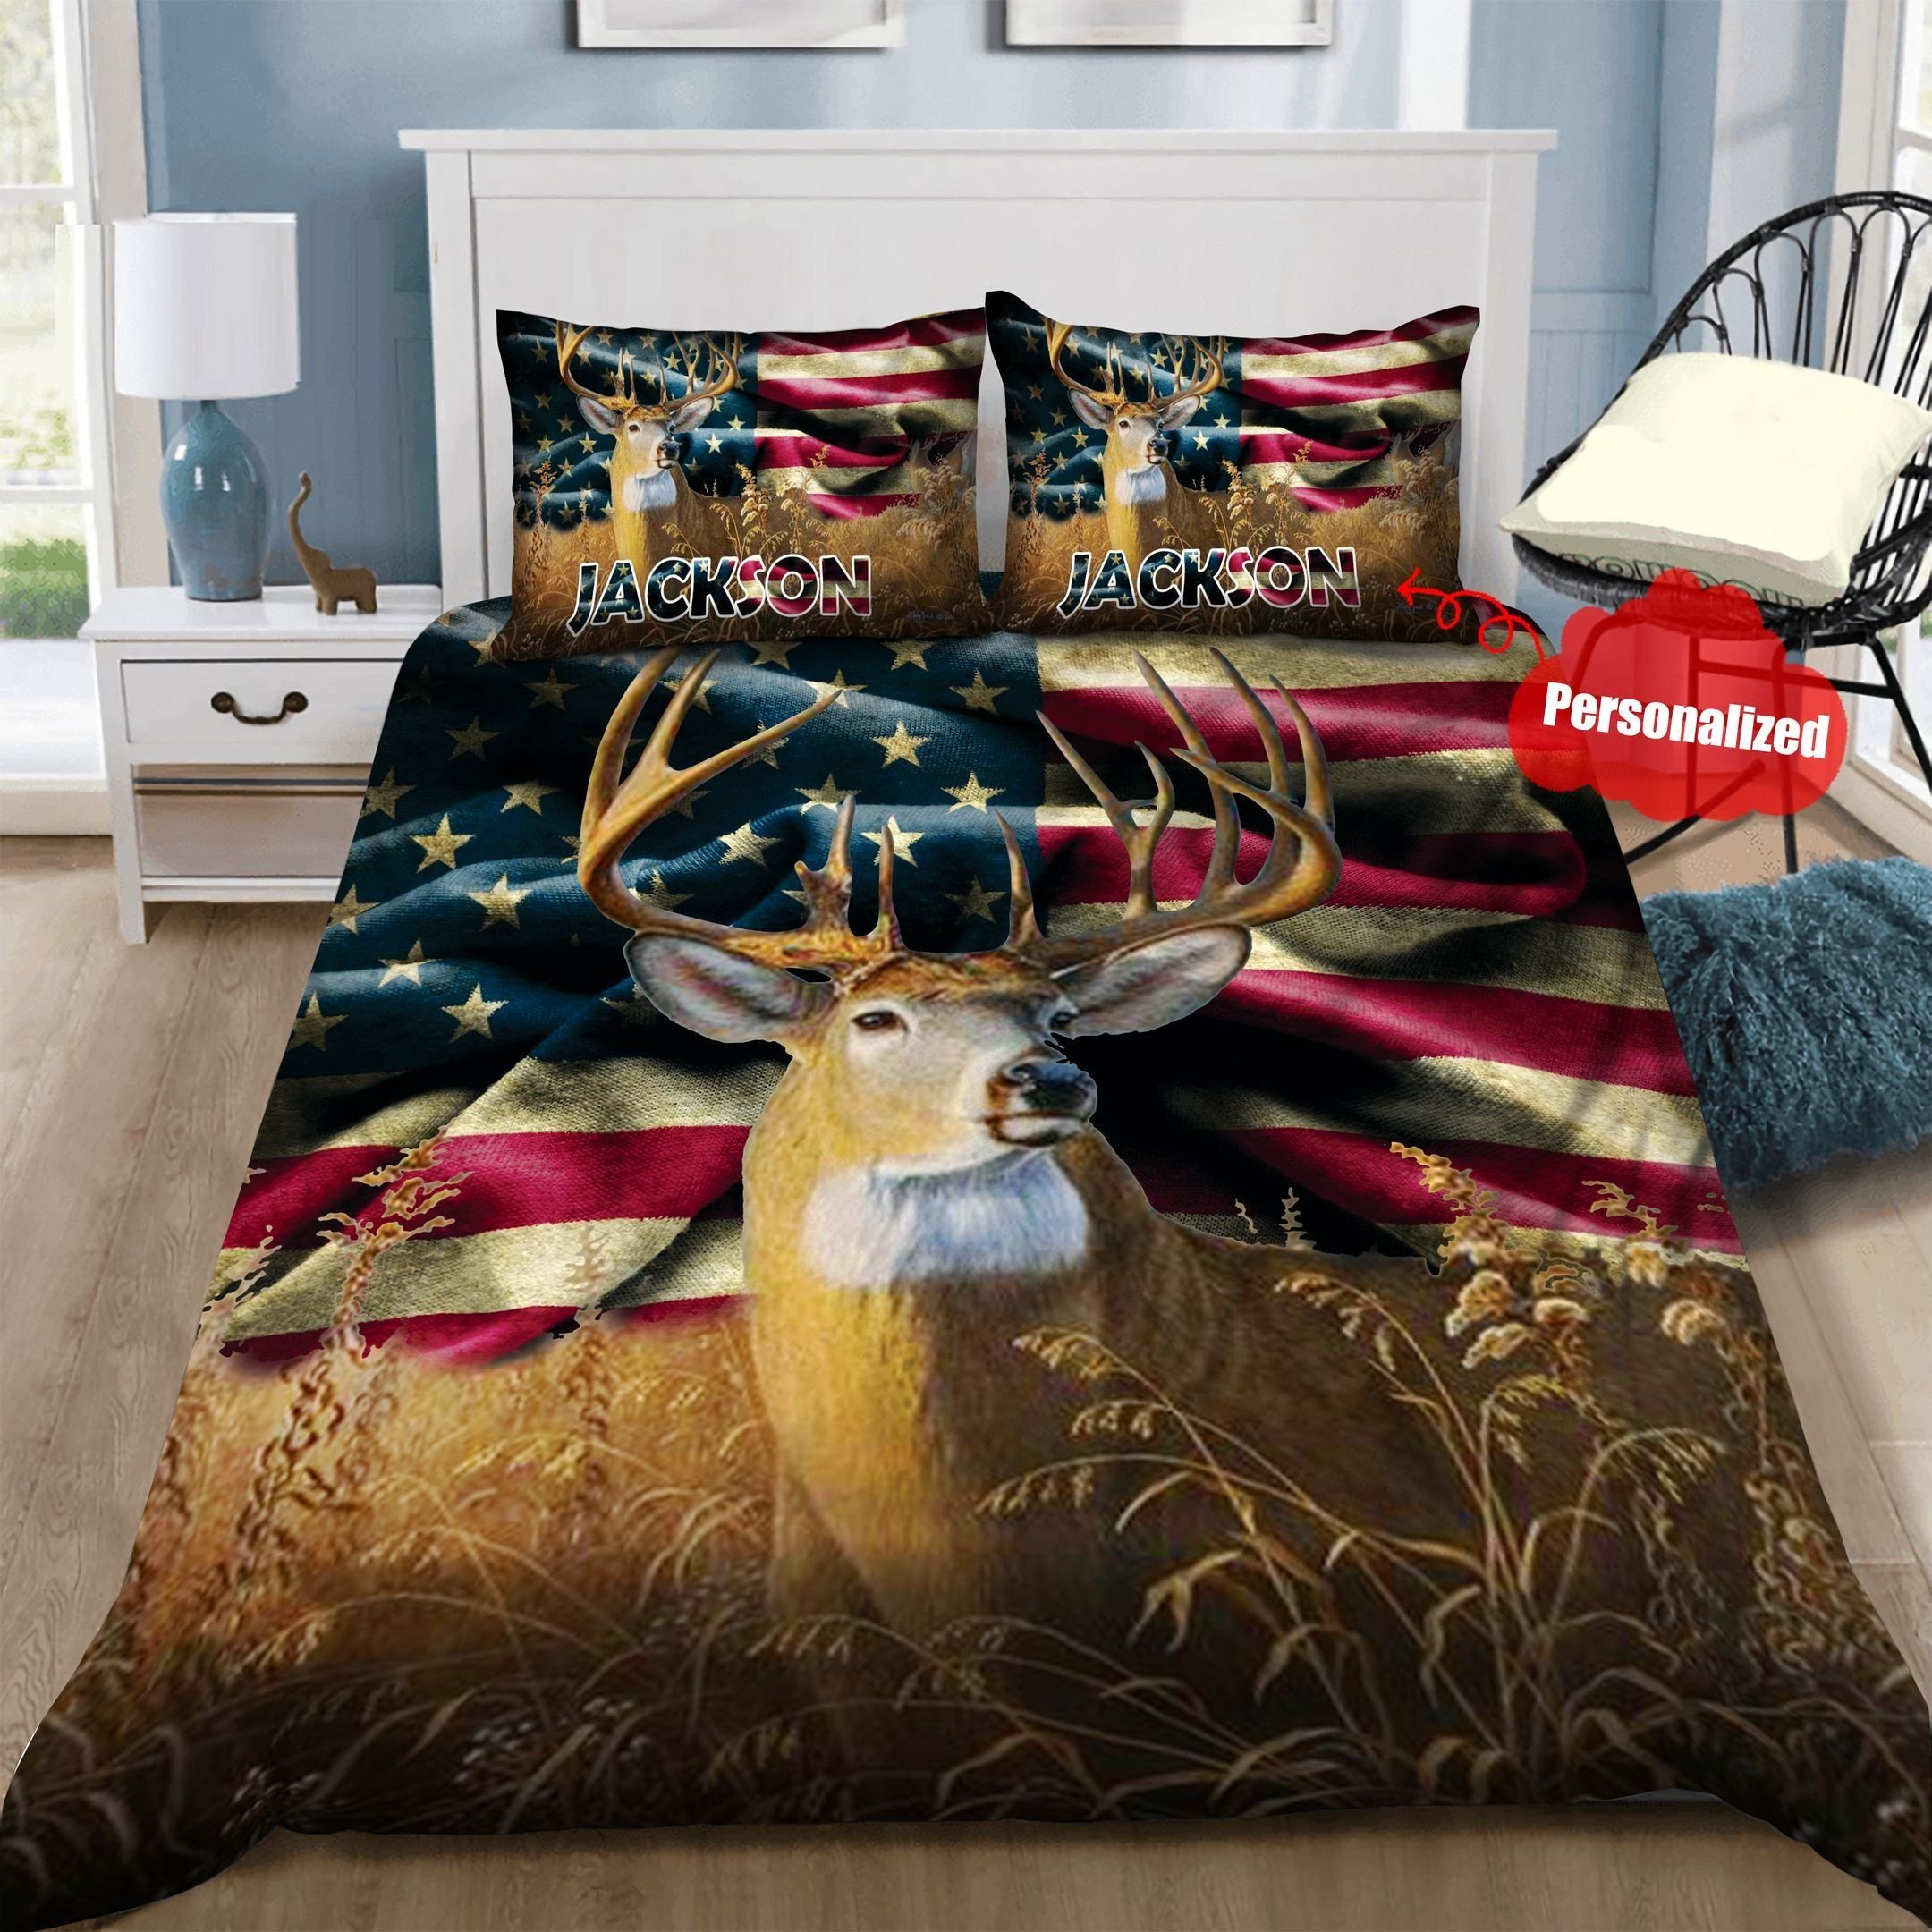 Personalized Deer Hunting American Flag Duvet Cover Bedding Sets Perfect Ts For Deer Hunting 1240